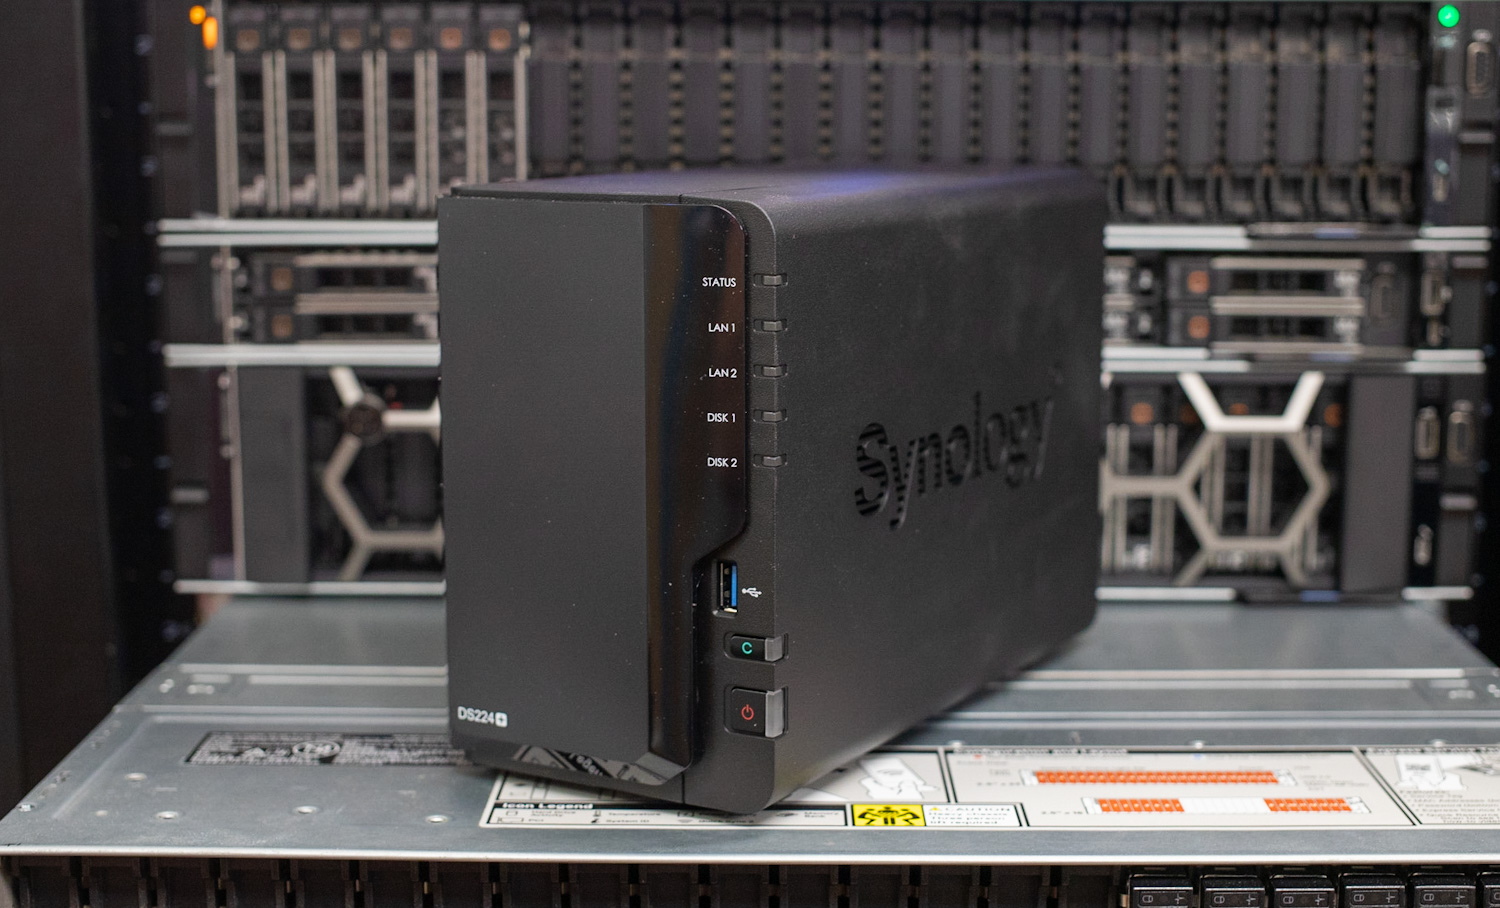 Synology's New 2-Bay DS223 NAS Promises Simple Data Management